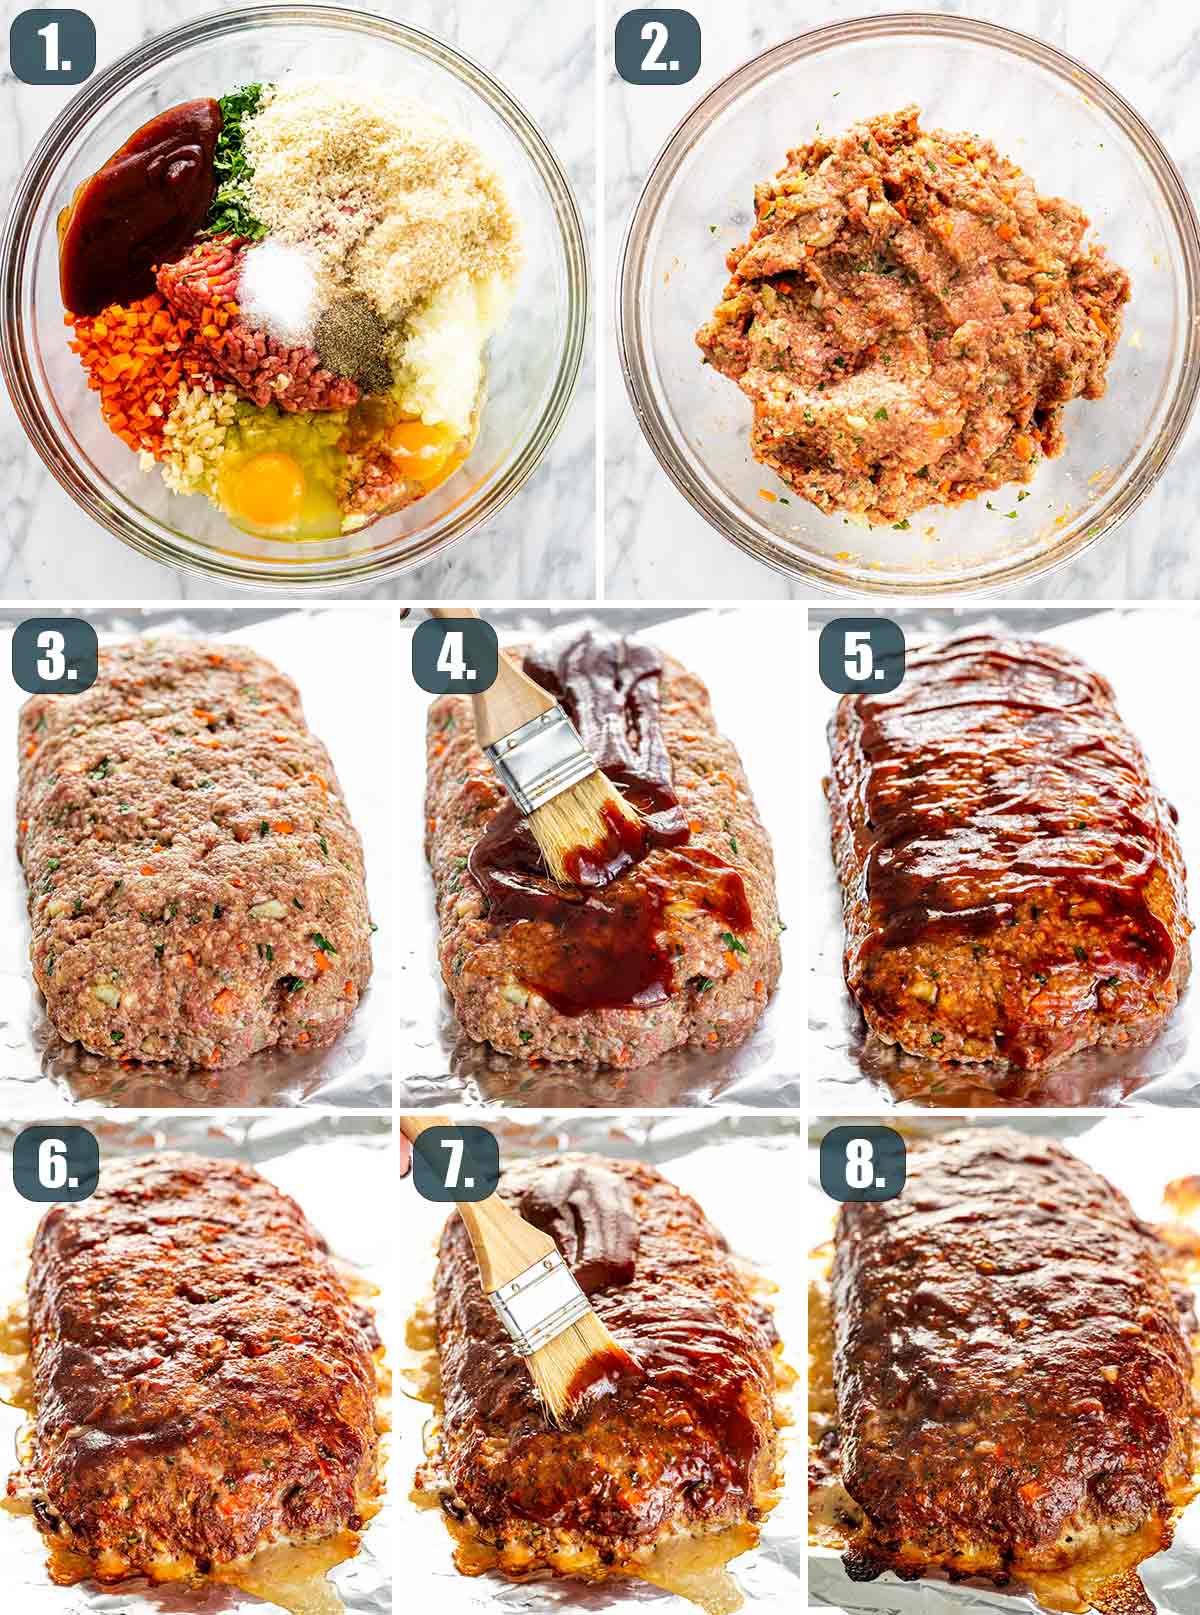 Easy Meatloaf Recipe - Craving Home Cooked